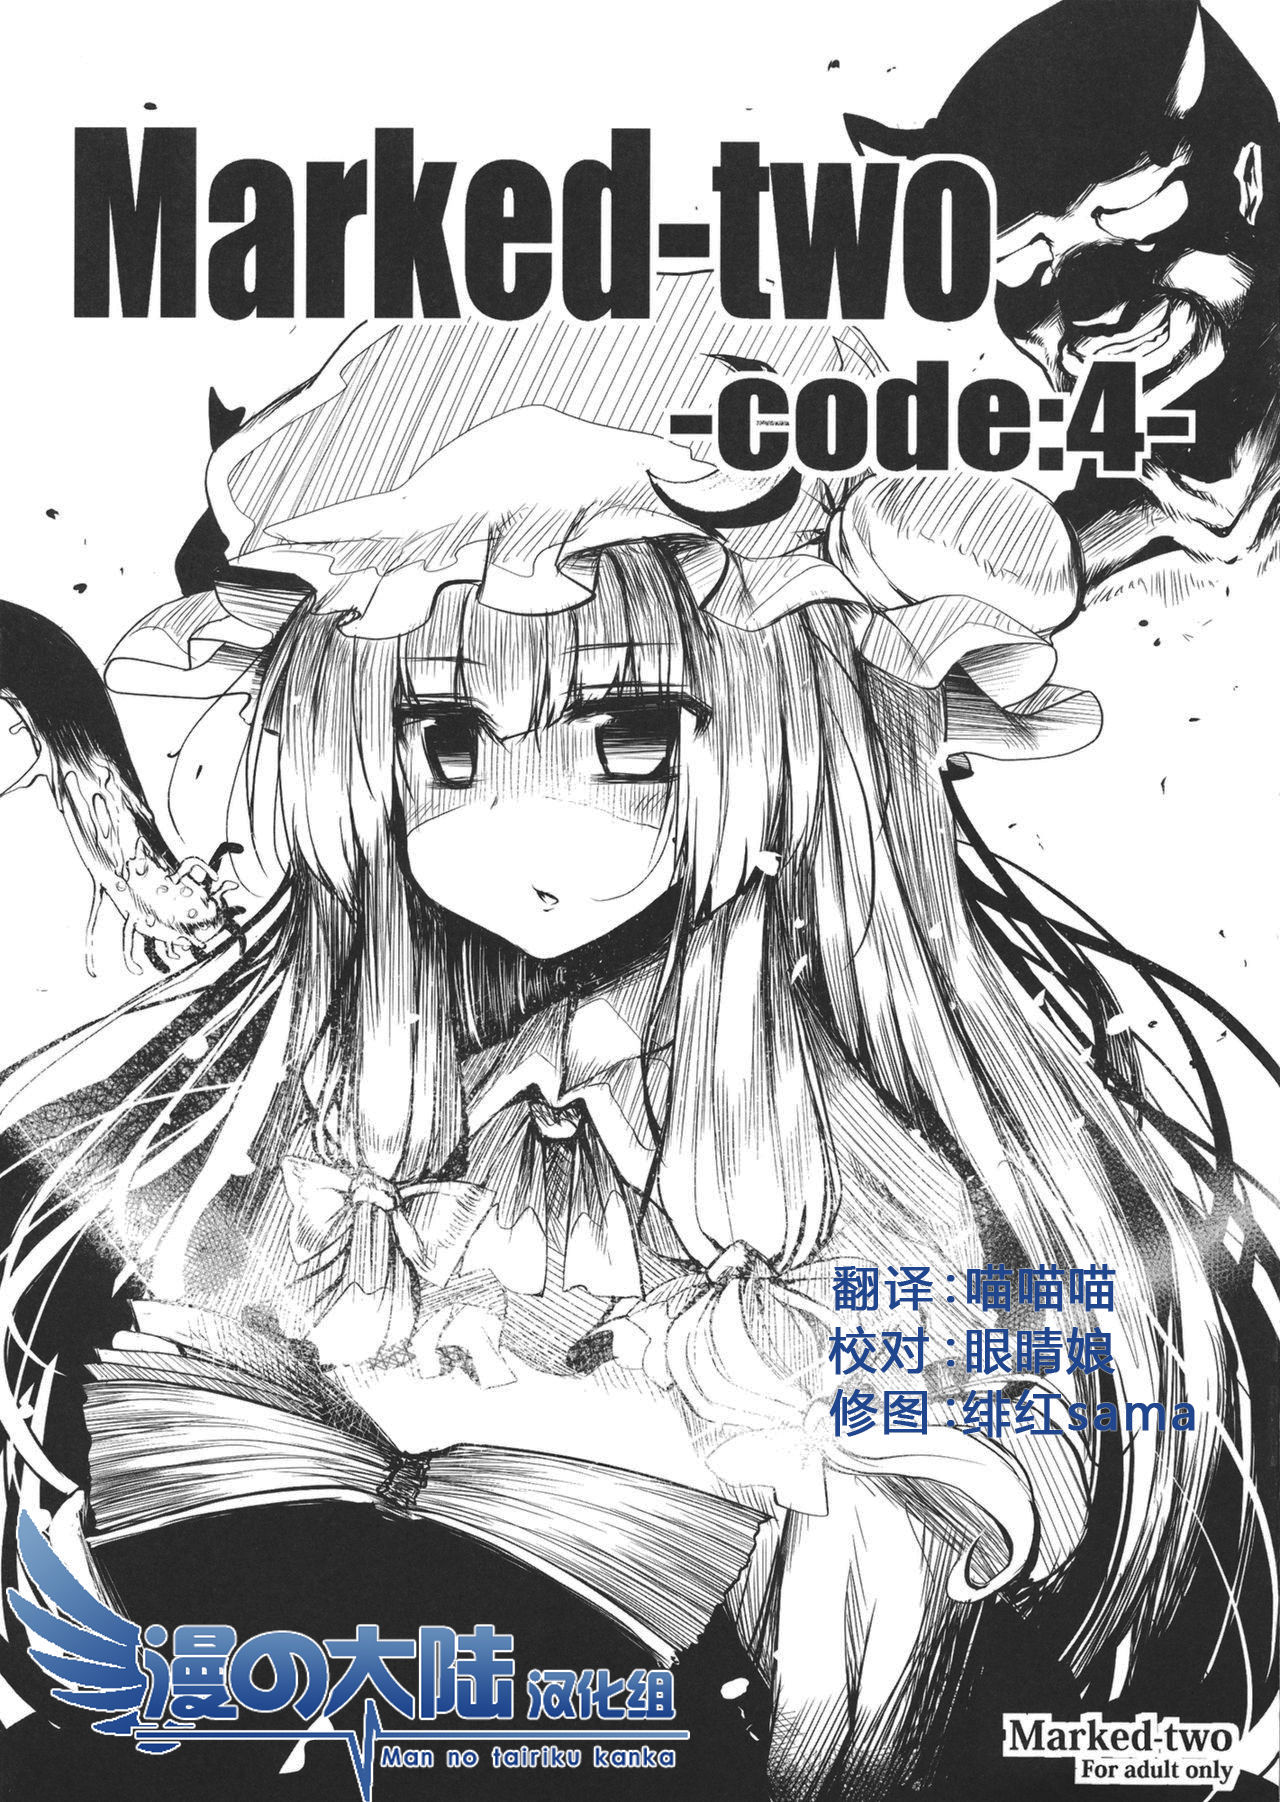 (C81) [Marked-two (Maa-kun)] Marked-two -code:4- (Touhou Project) [Chinese] [漫之大陆汉化组] (C81) [Marked-two (まーくん)] Marked-two -code：4- (東方Project) [中国翻訳]